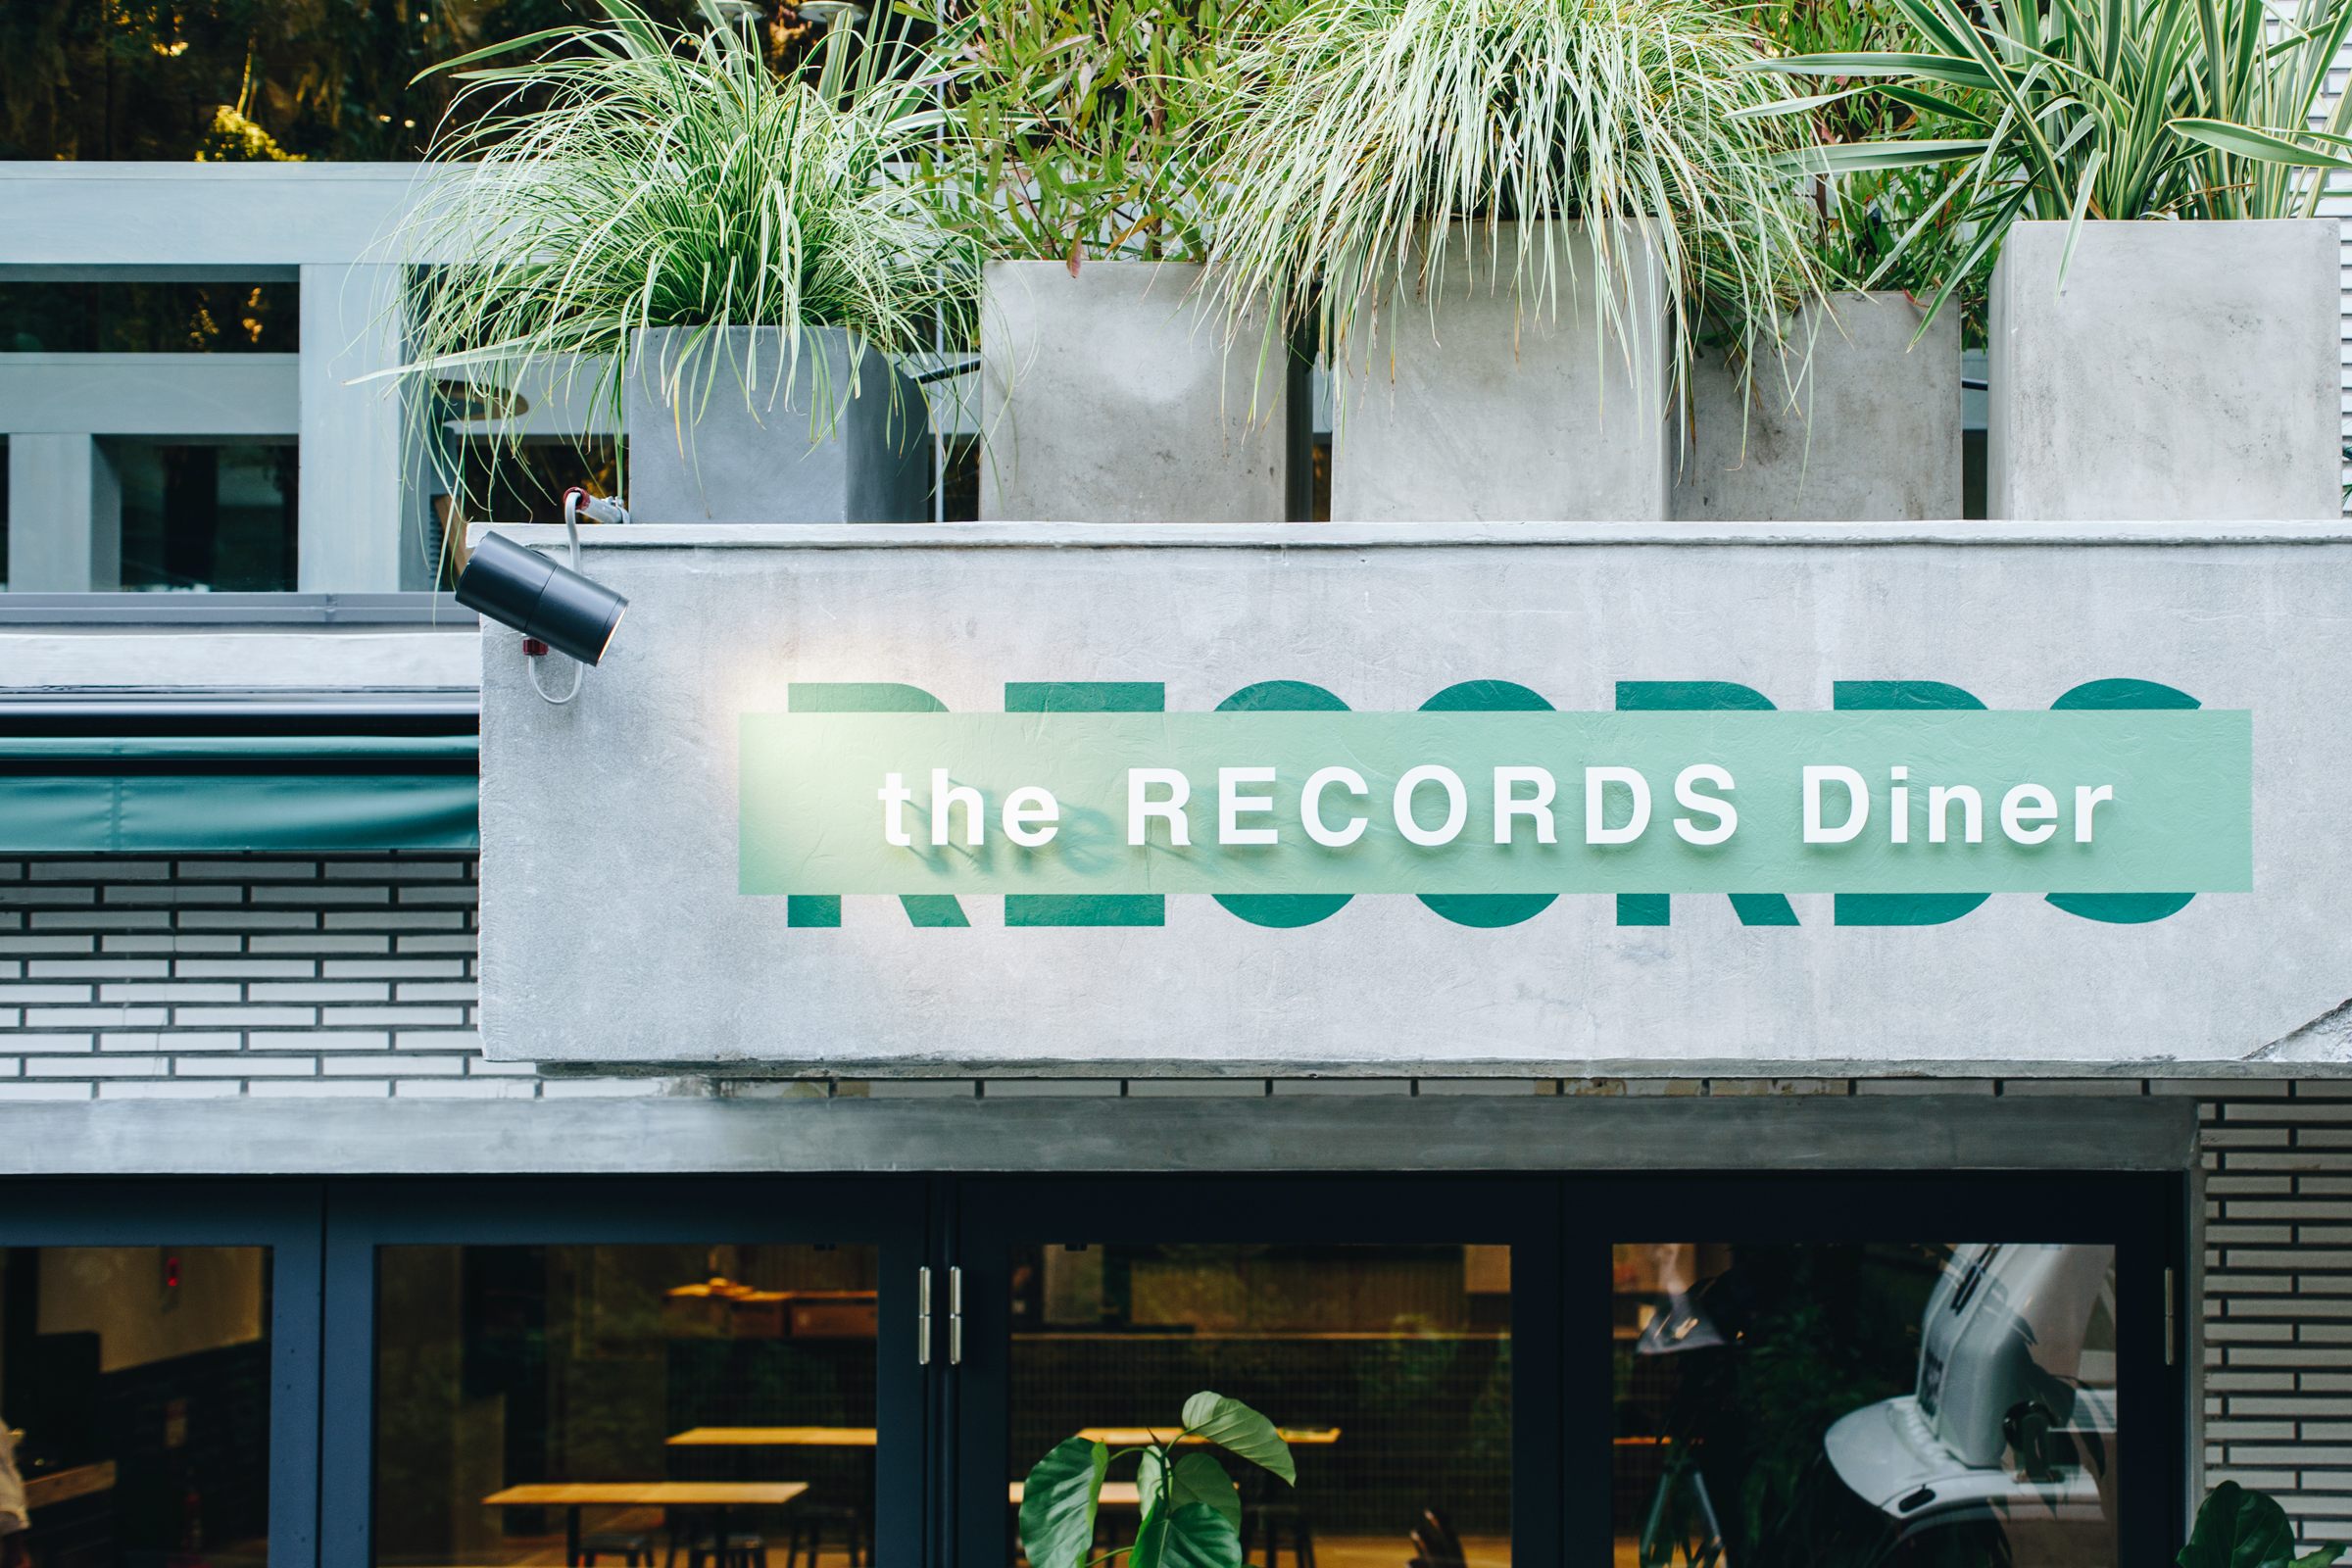 the RECORDS Diner ご利用のご案内のイメージ写真